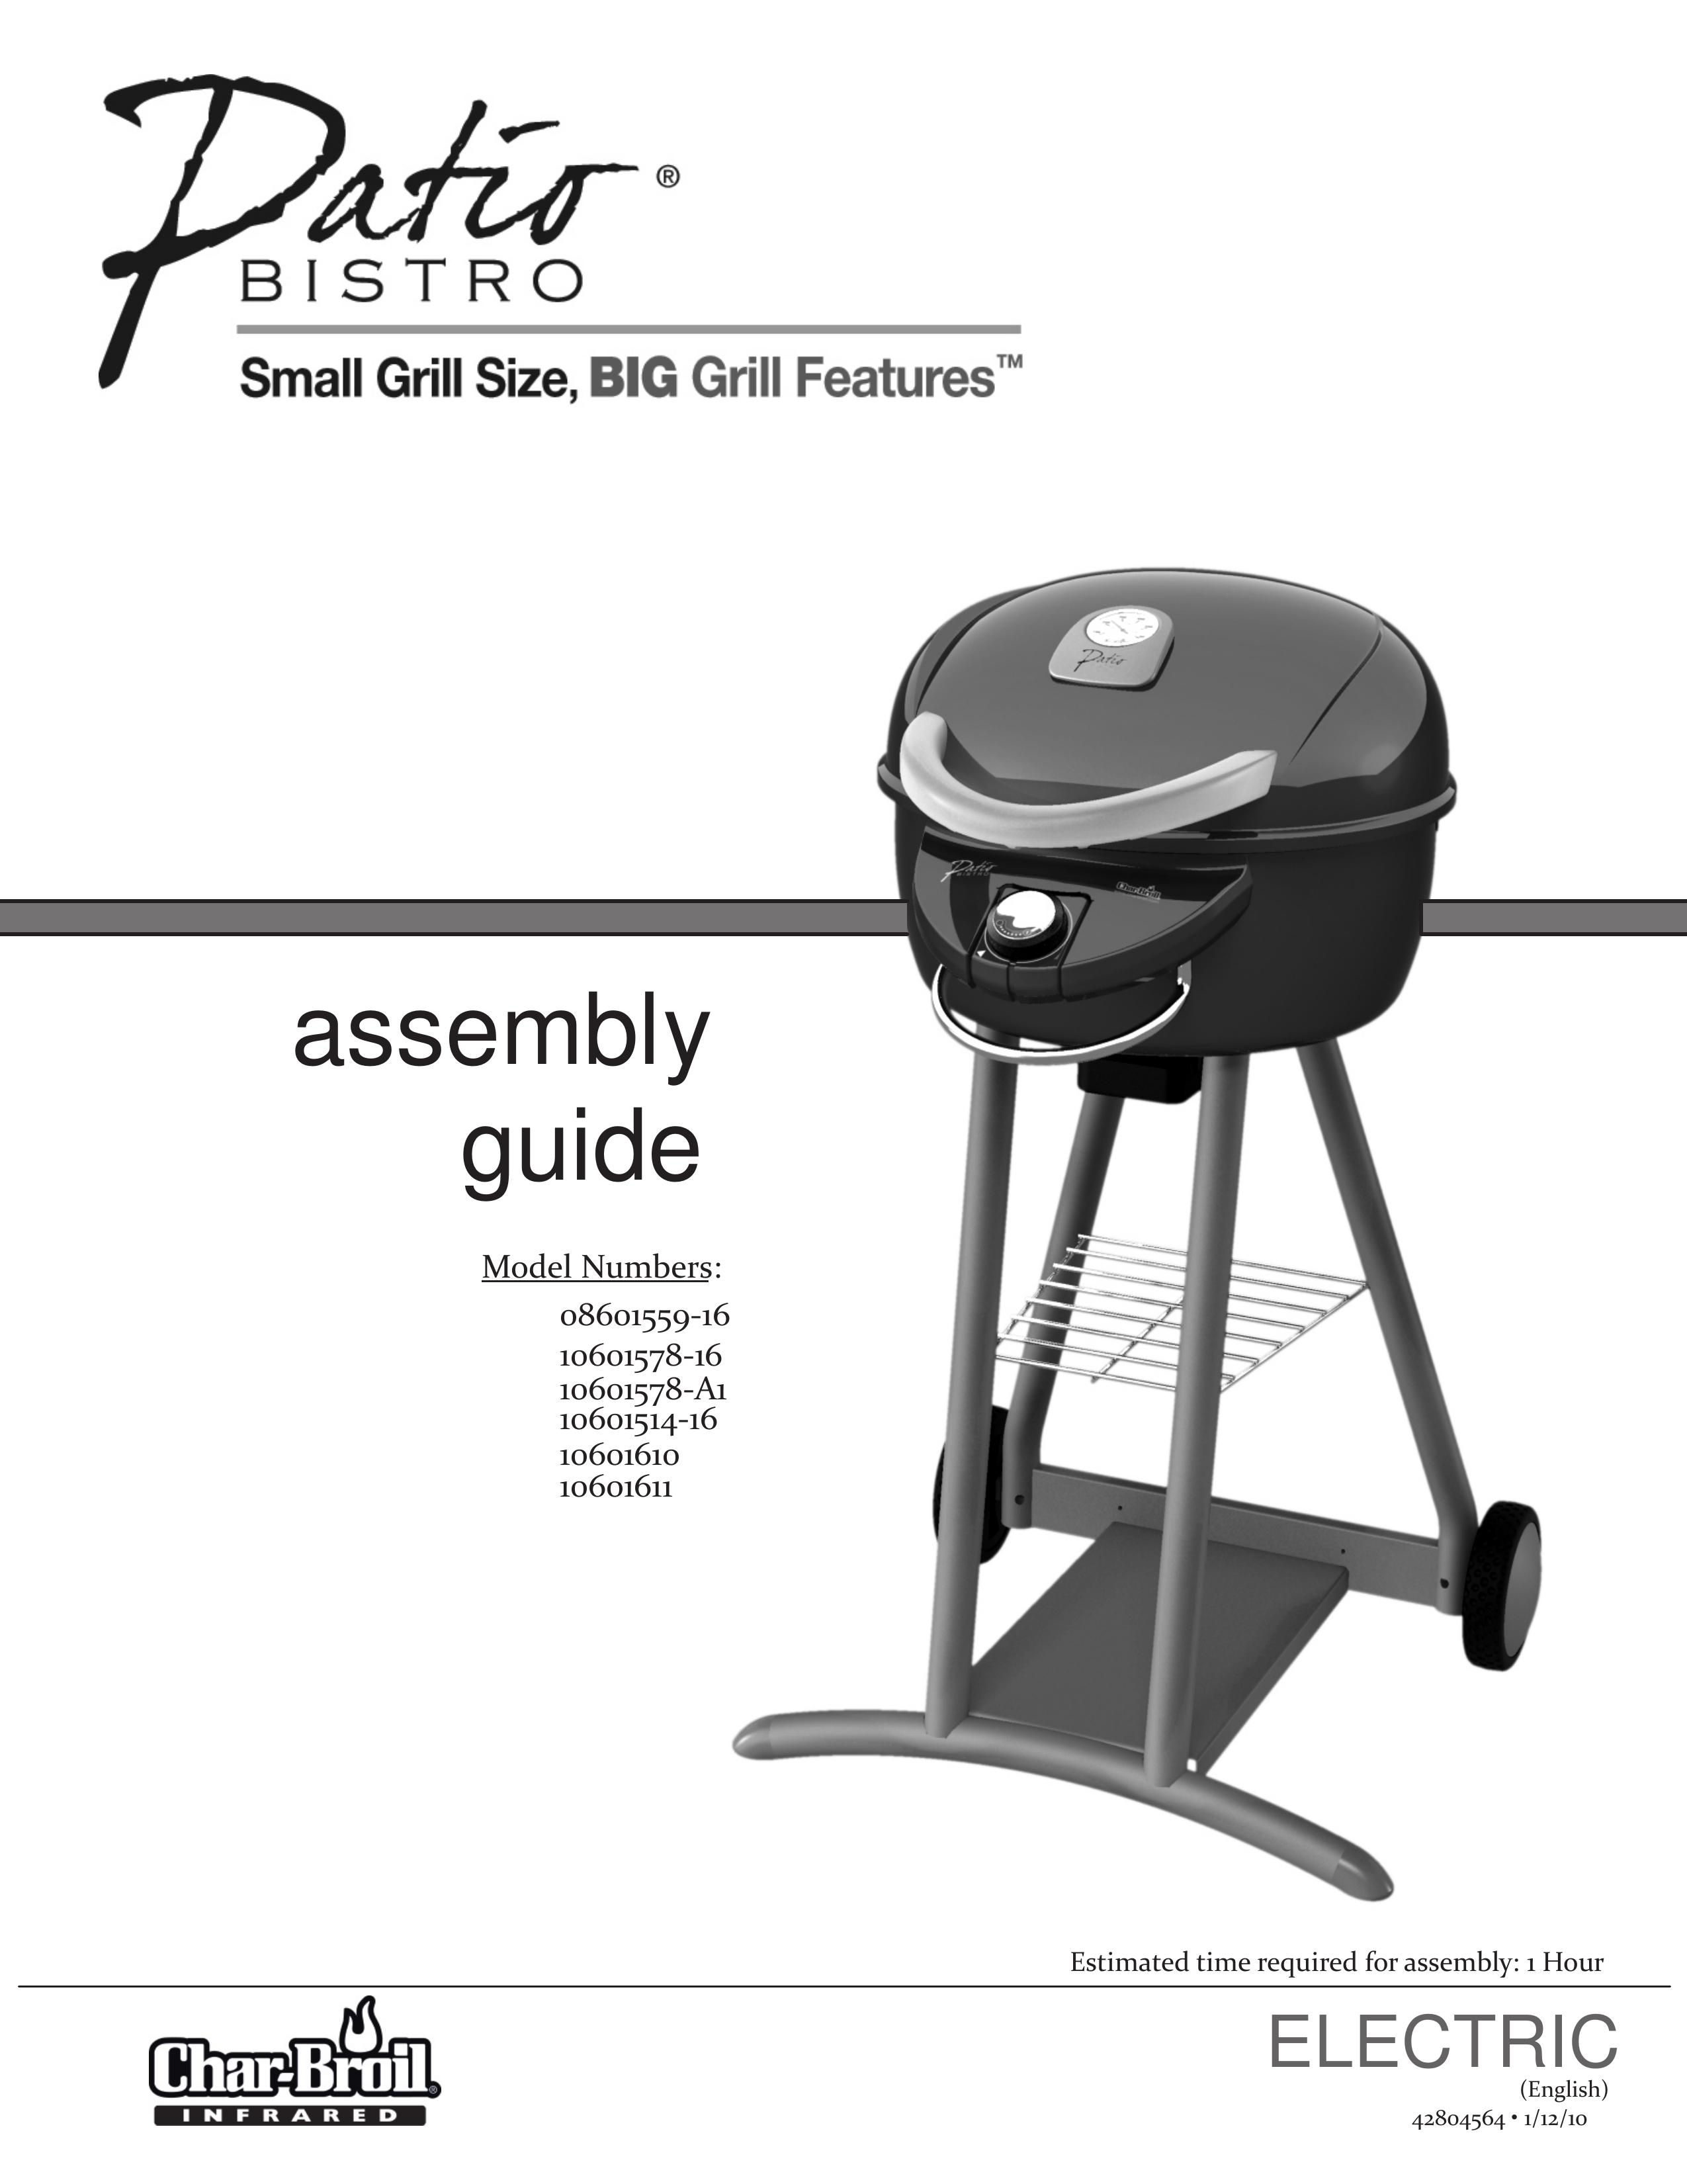 Char-Broil 10601611 Electric Grill User Manual